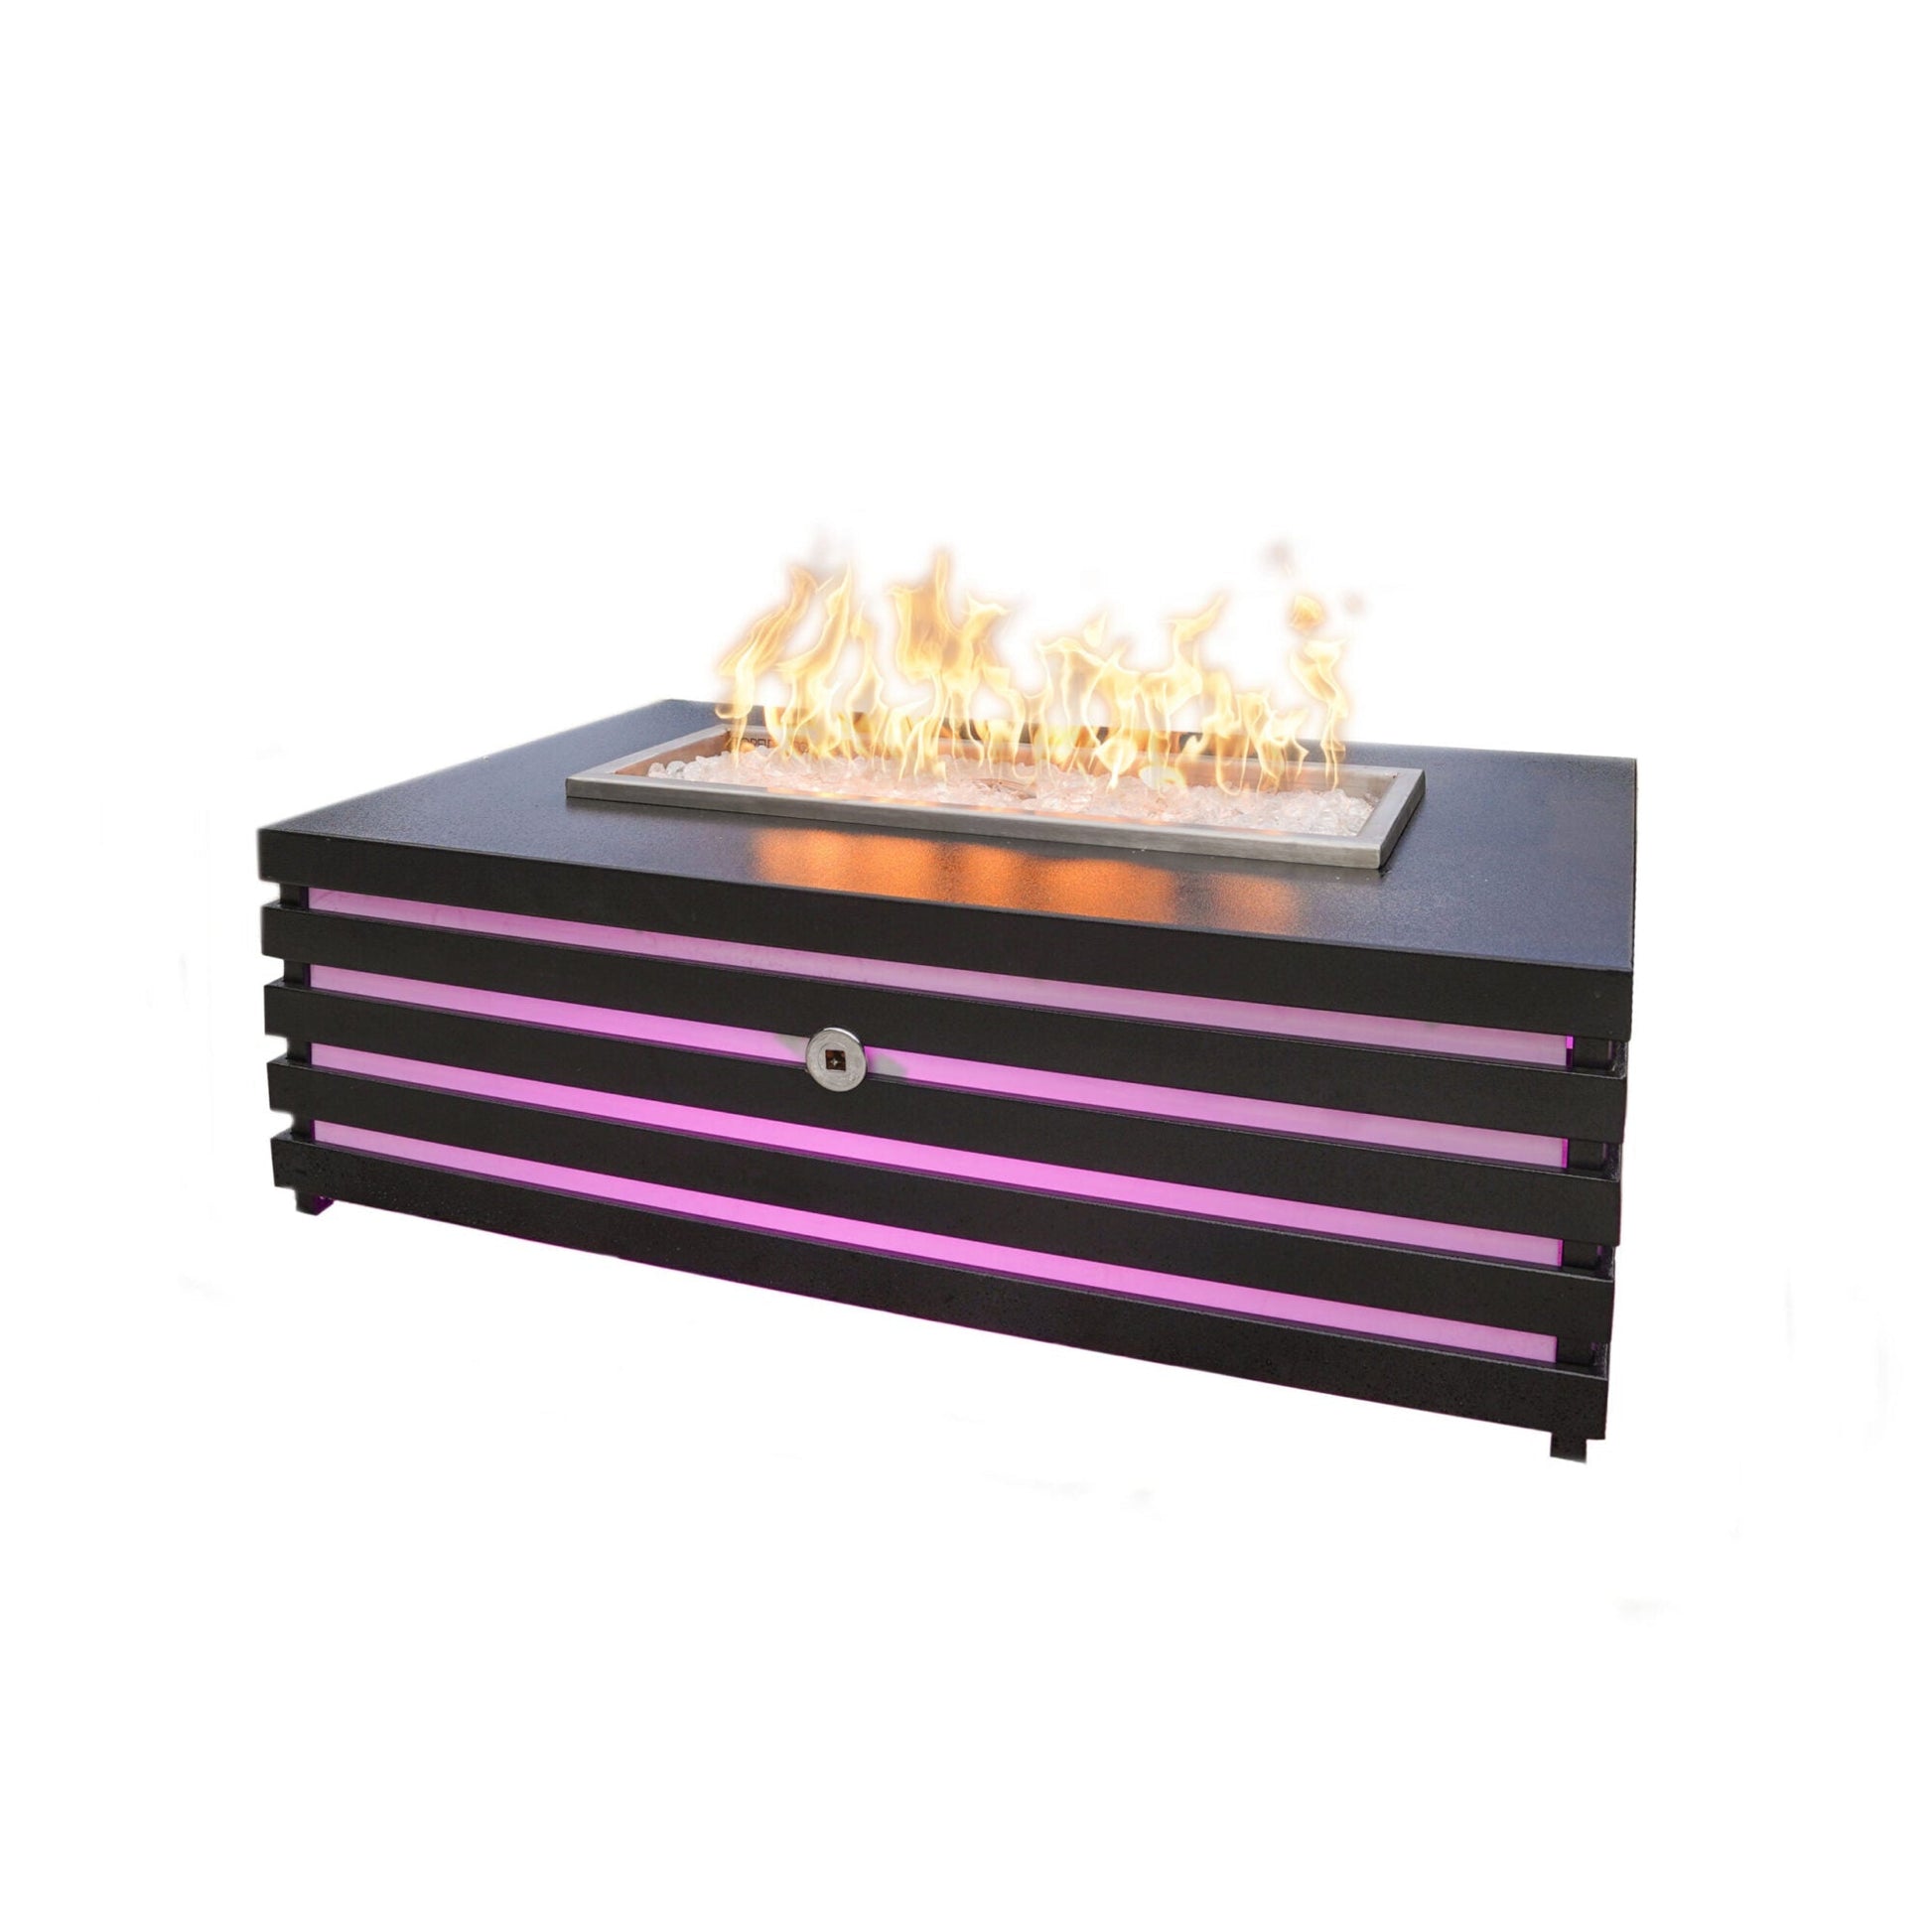 The Outdoor Plus Amina 48" Java Powder Coated Natural Gas Fire Pit with 110V Electronic Ignition